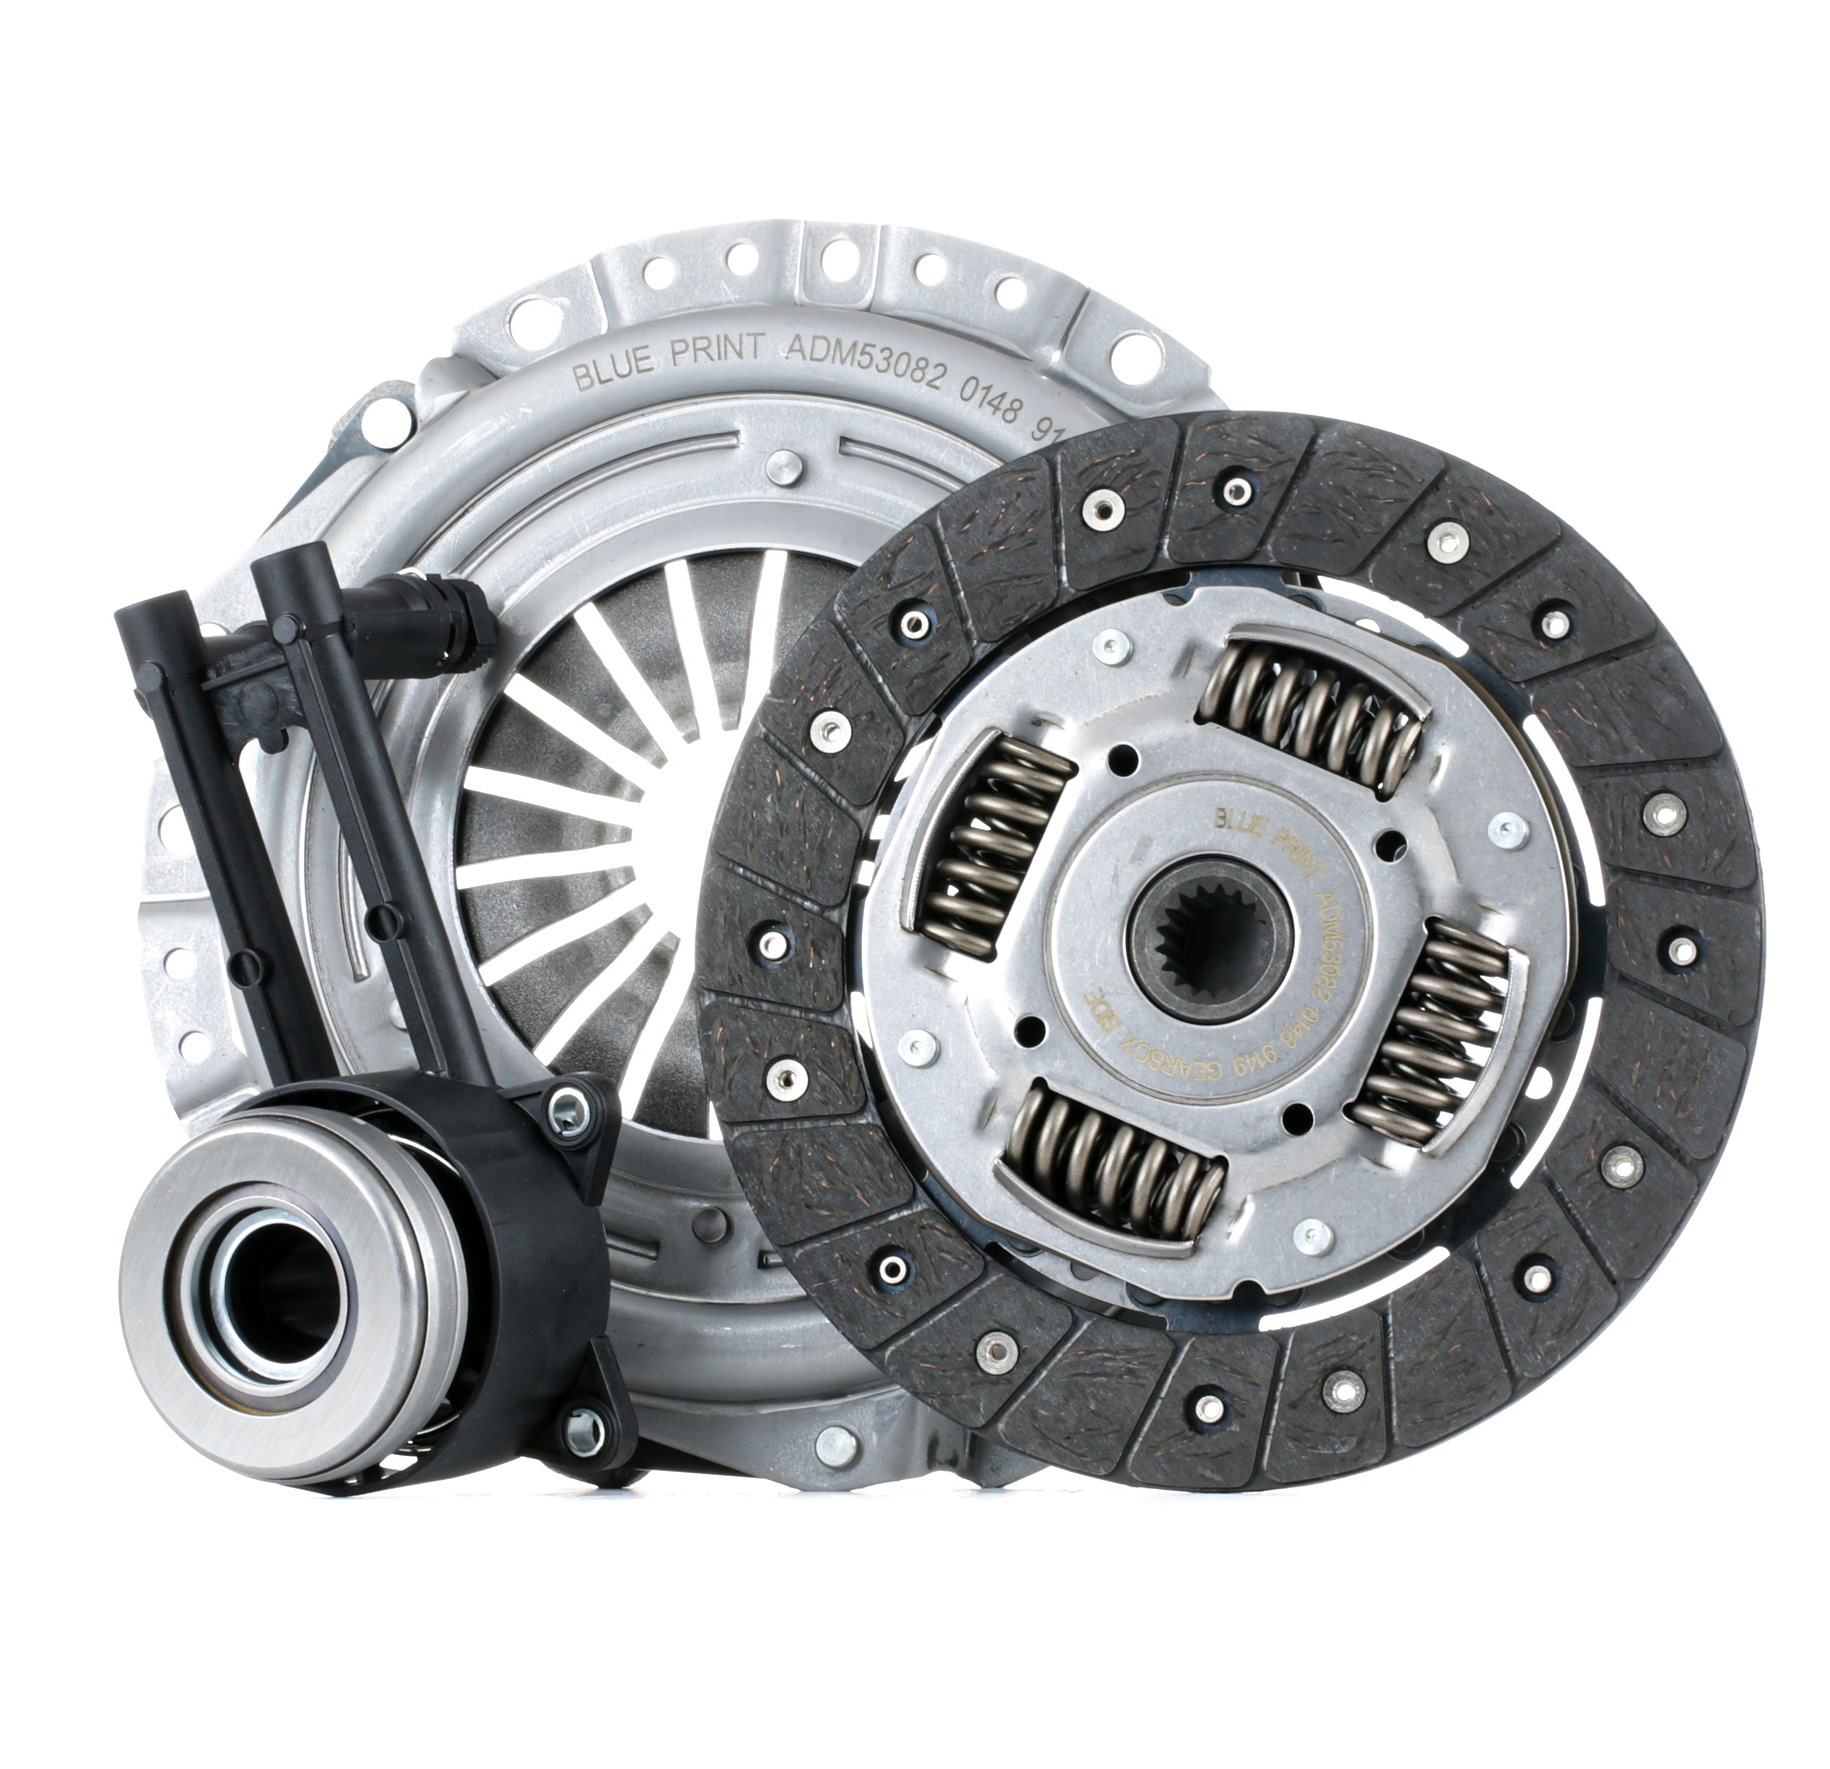 BLUE PRINT ADF123048 Clutch kit three-piece, with central slave cylinder, with synthetic grease, 190mm